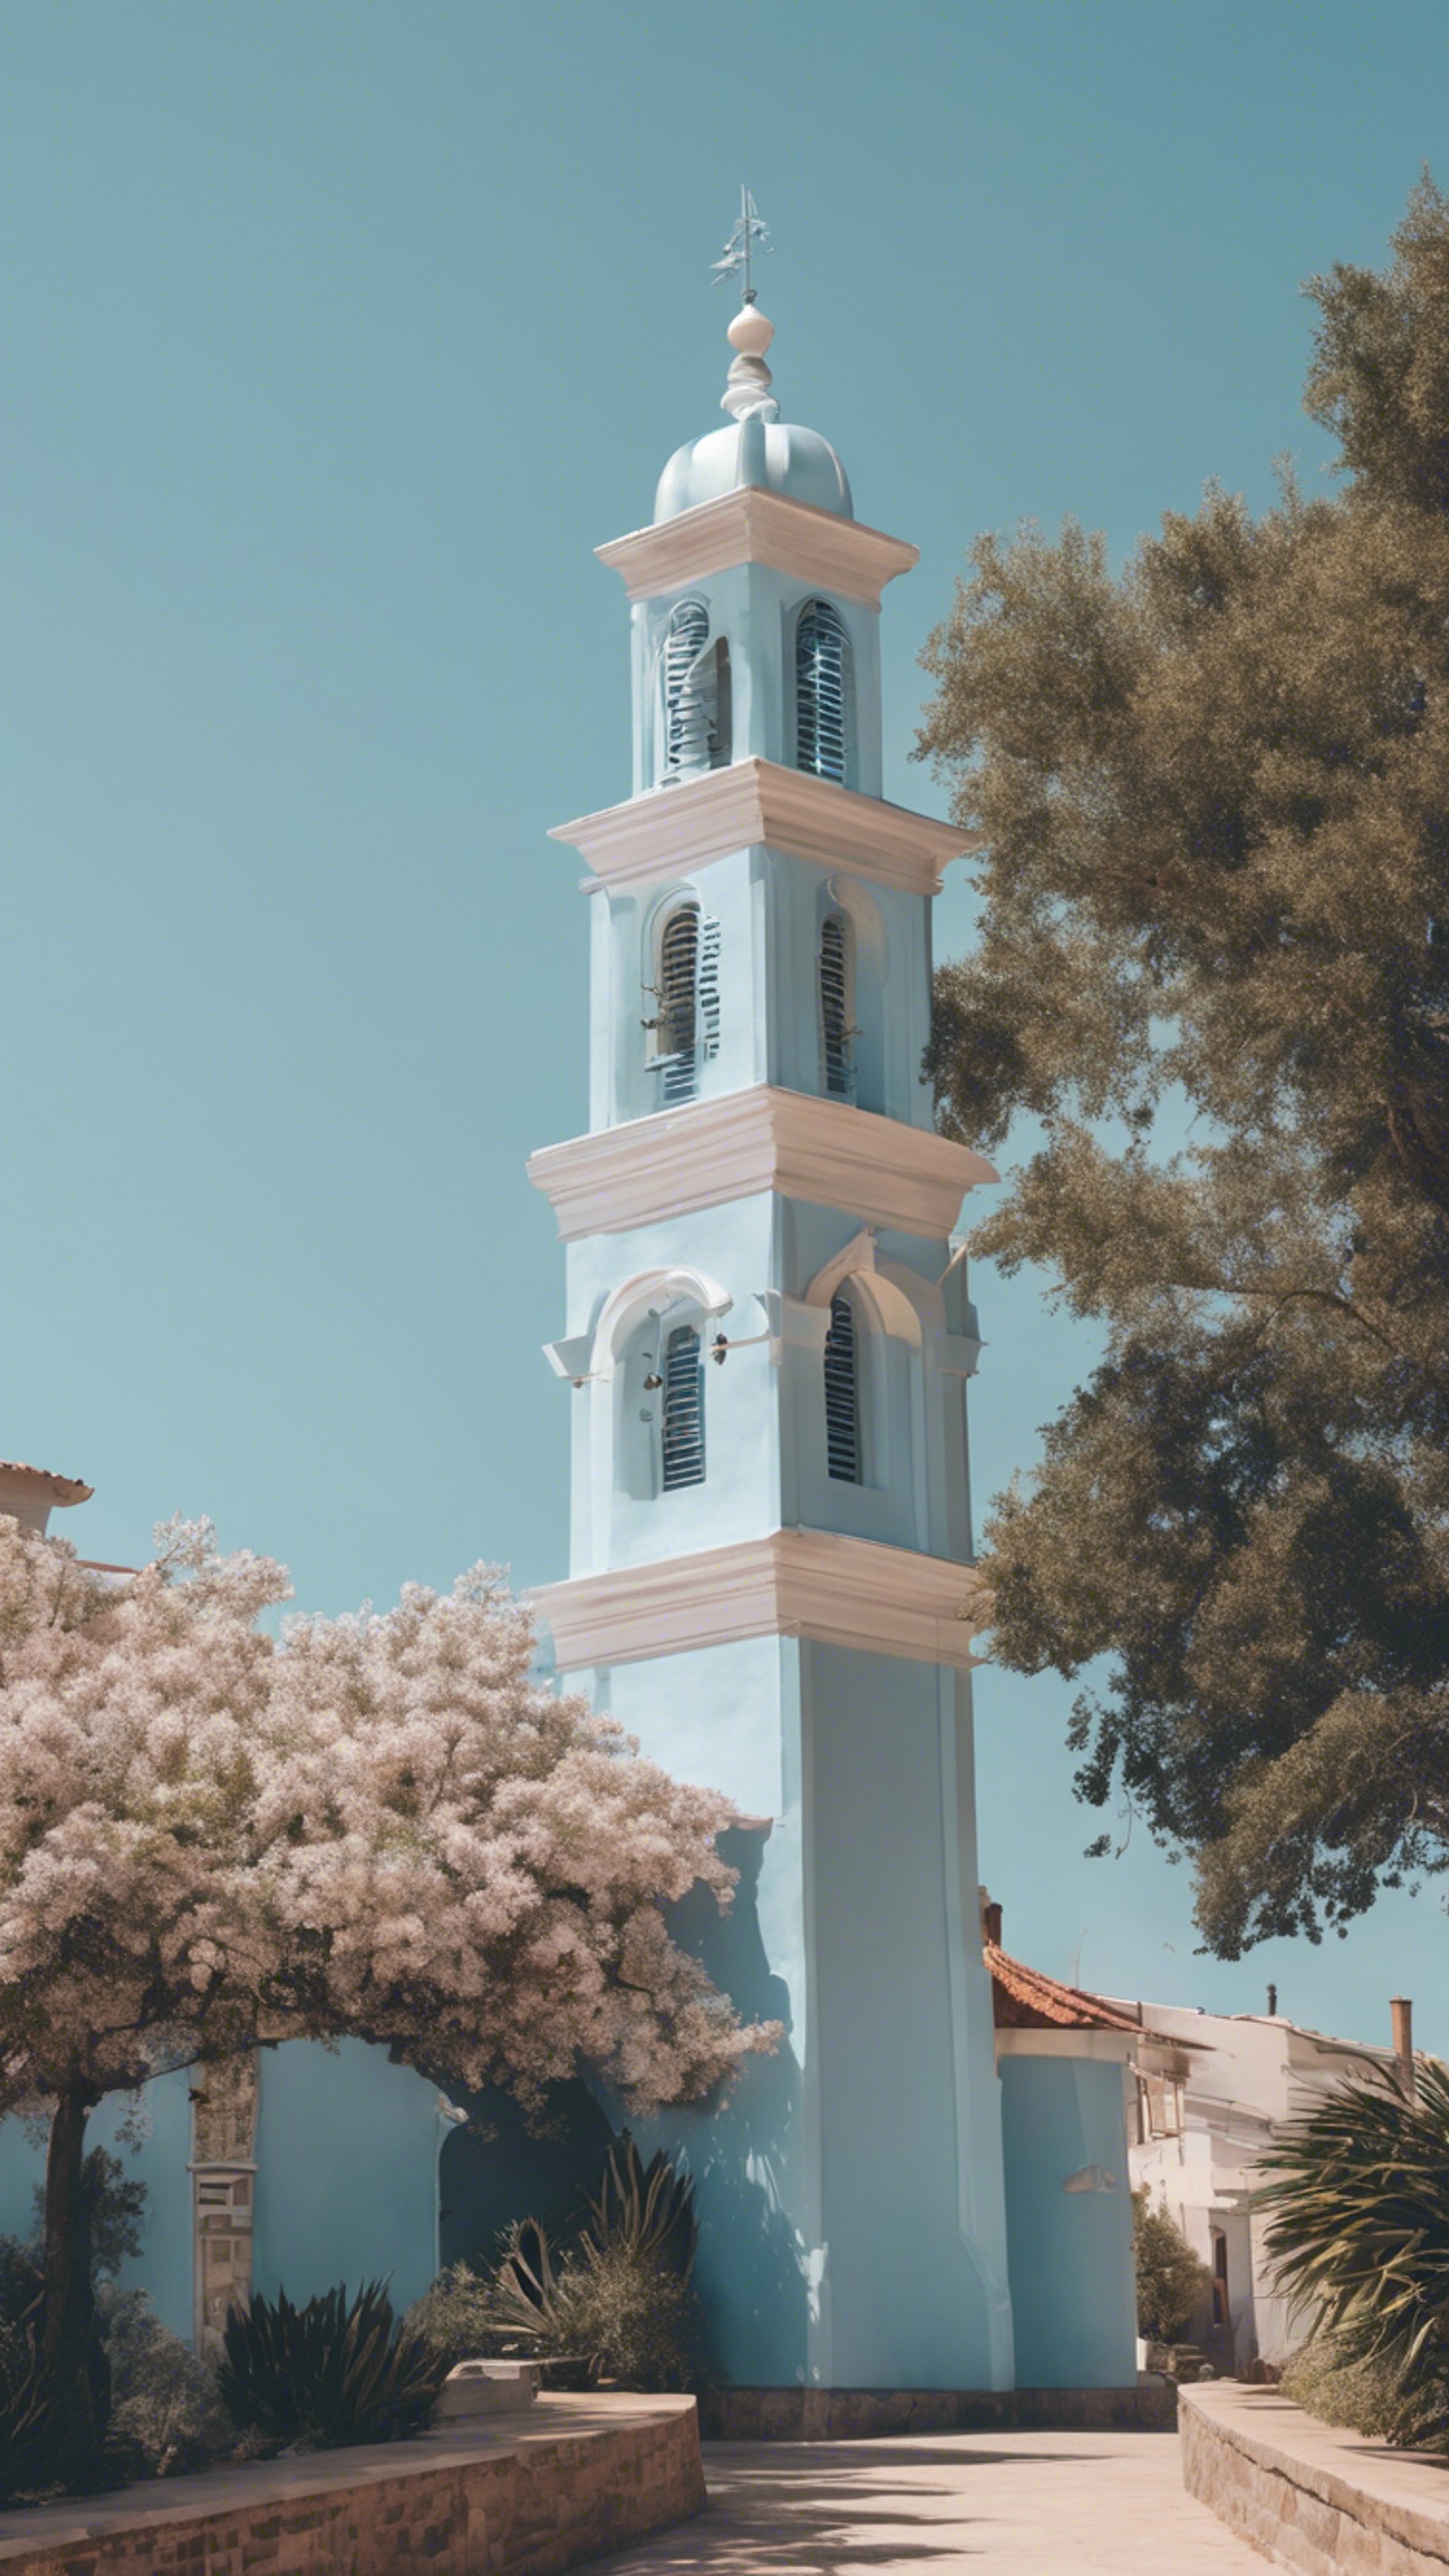 A stately pastel blue bell tower against a clear, sunny sky in a coastal town. Tapet[a05c52dcc3054b35b6be]